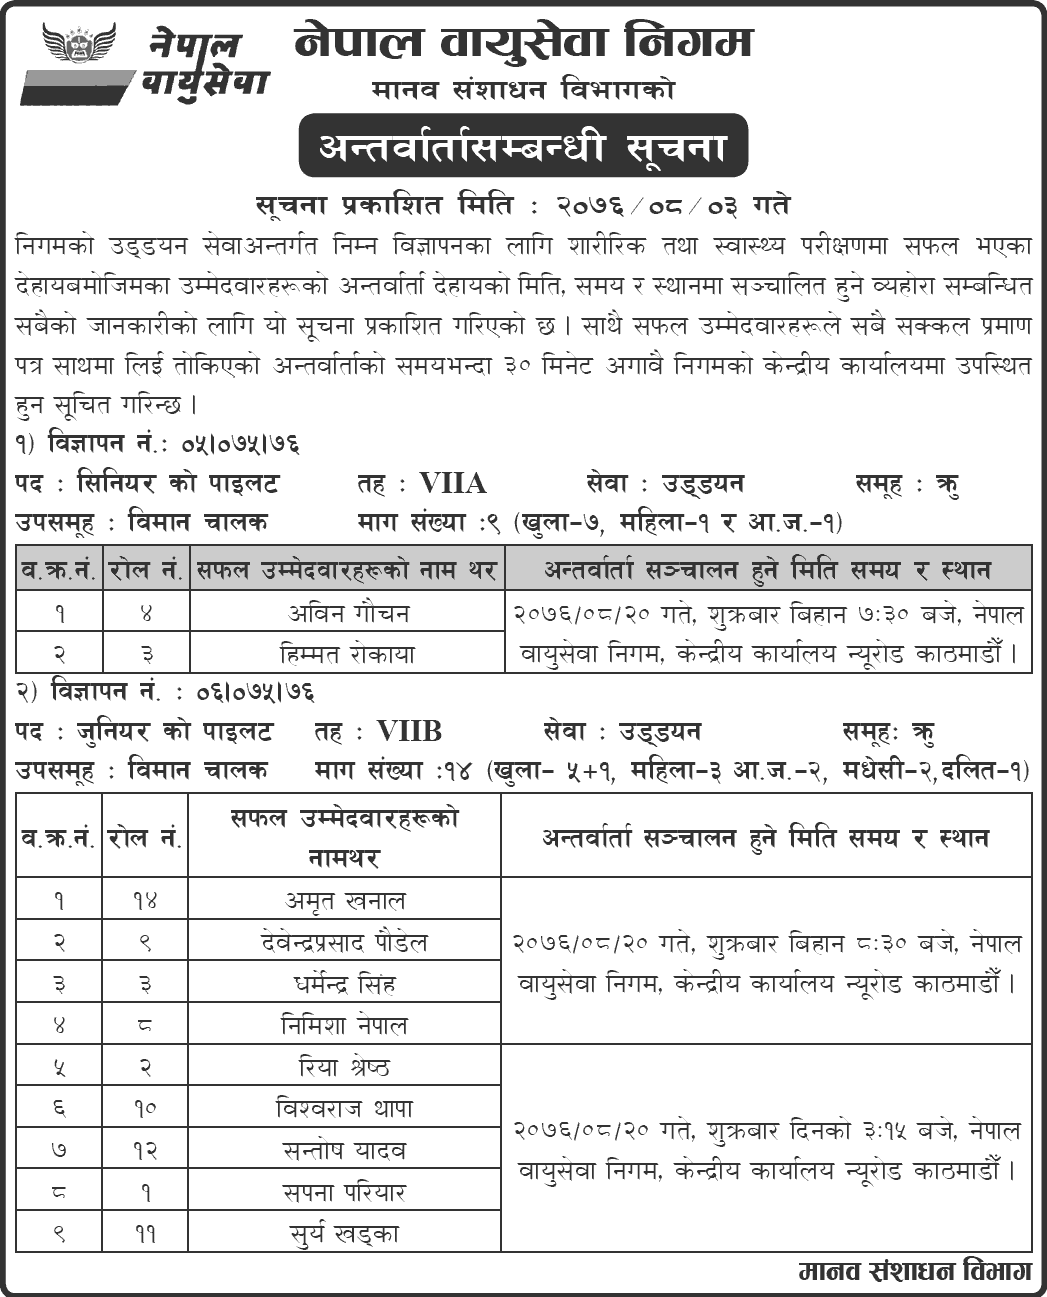 Nepal Airlines Corporation Notice for Interview